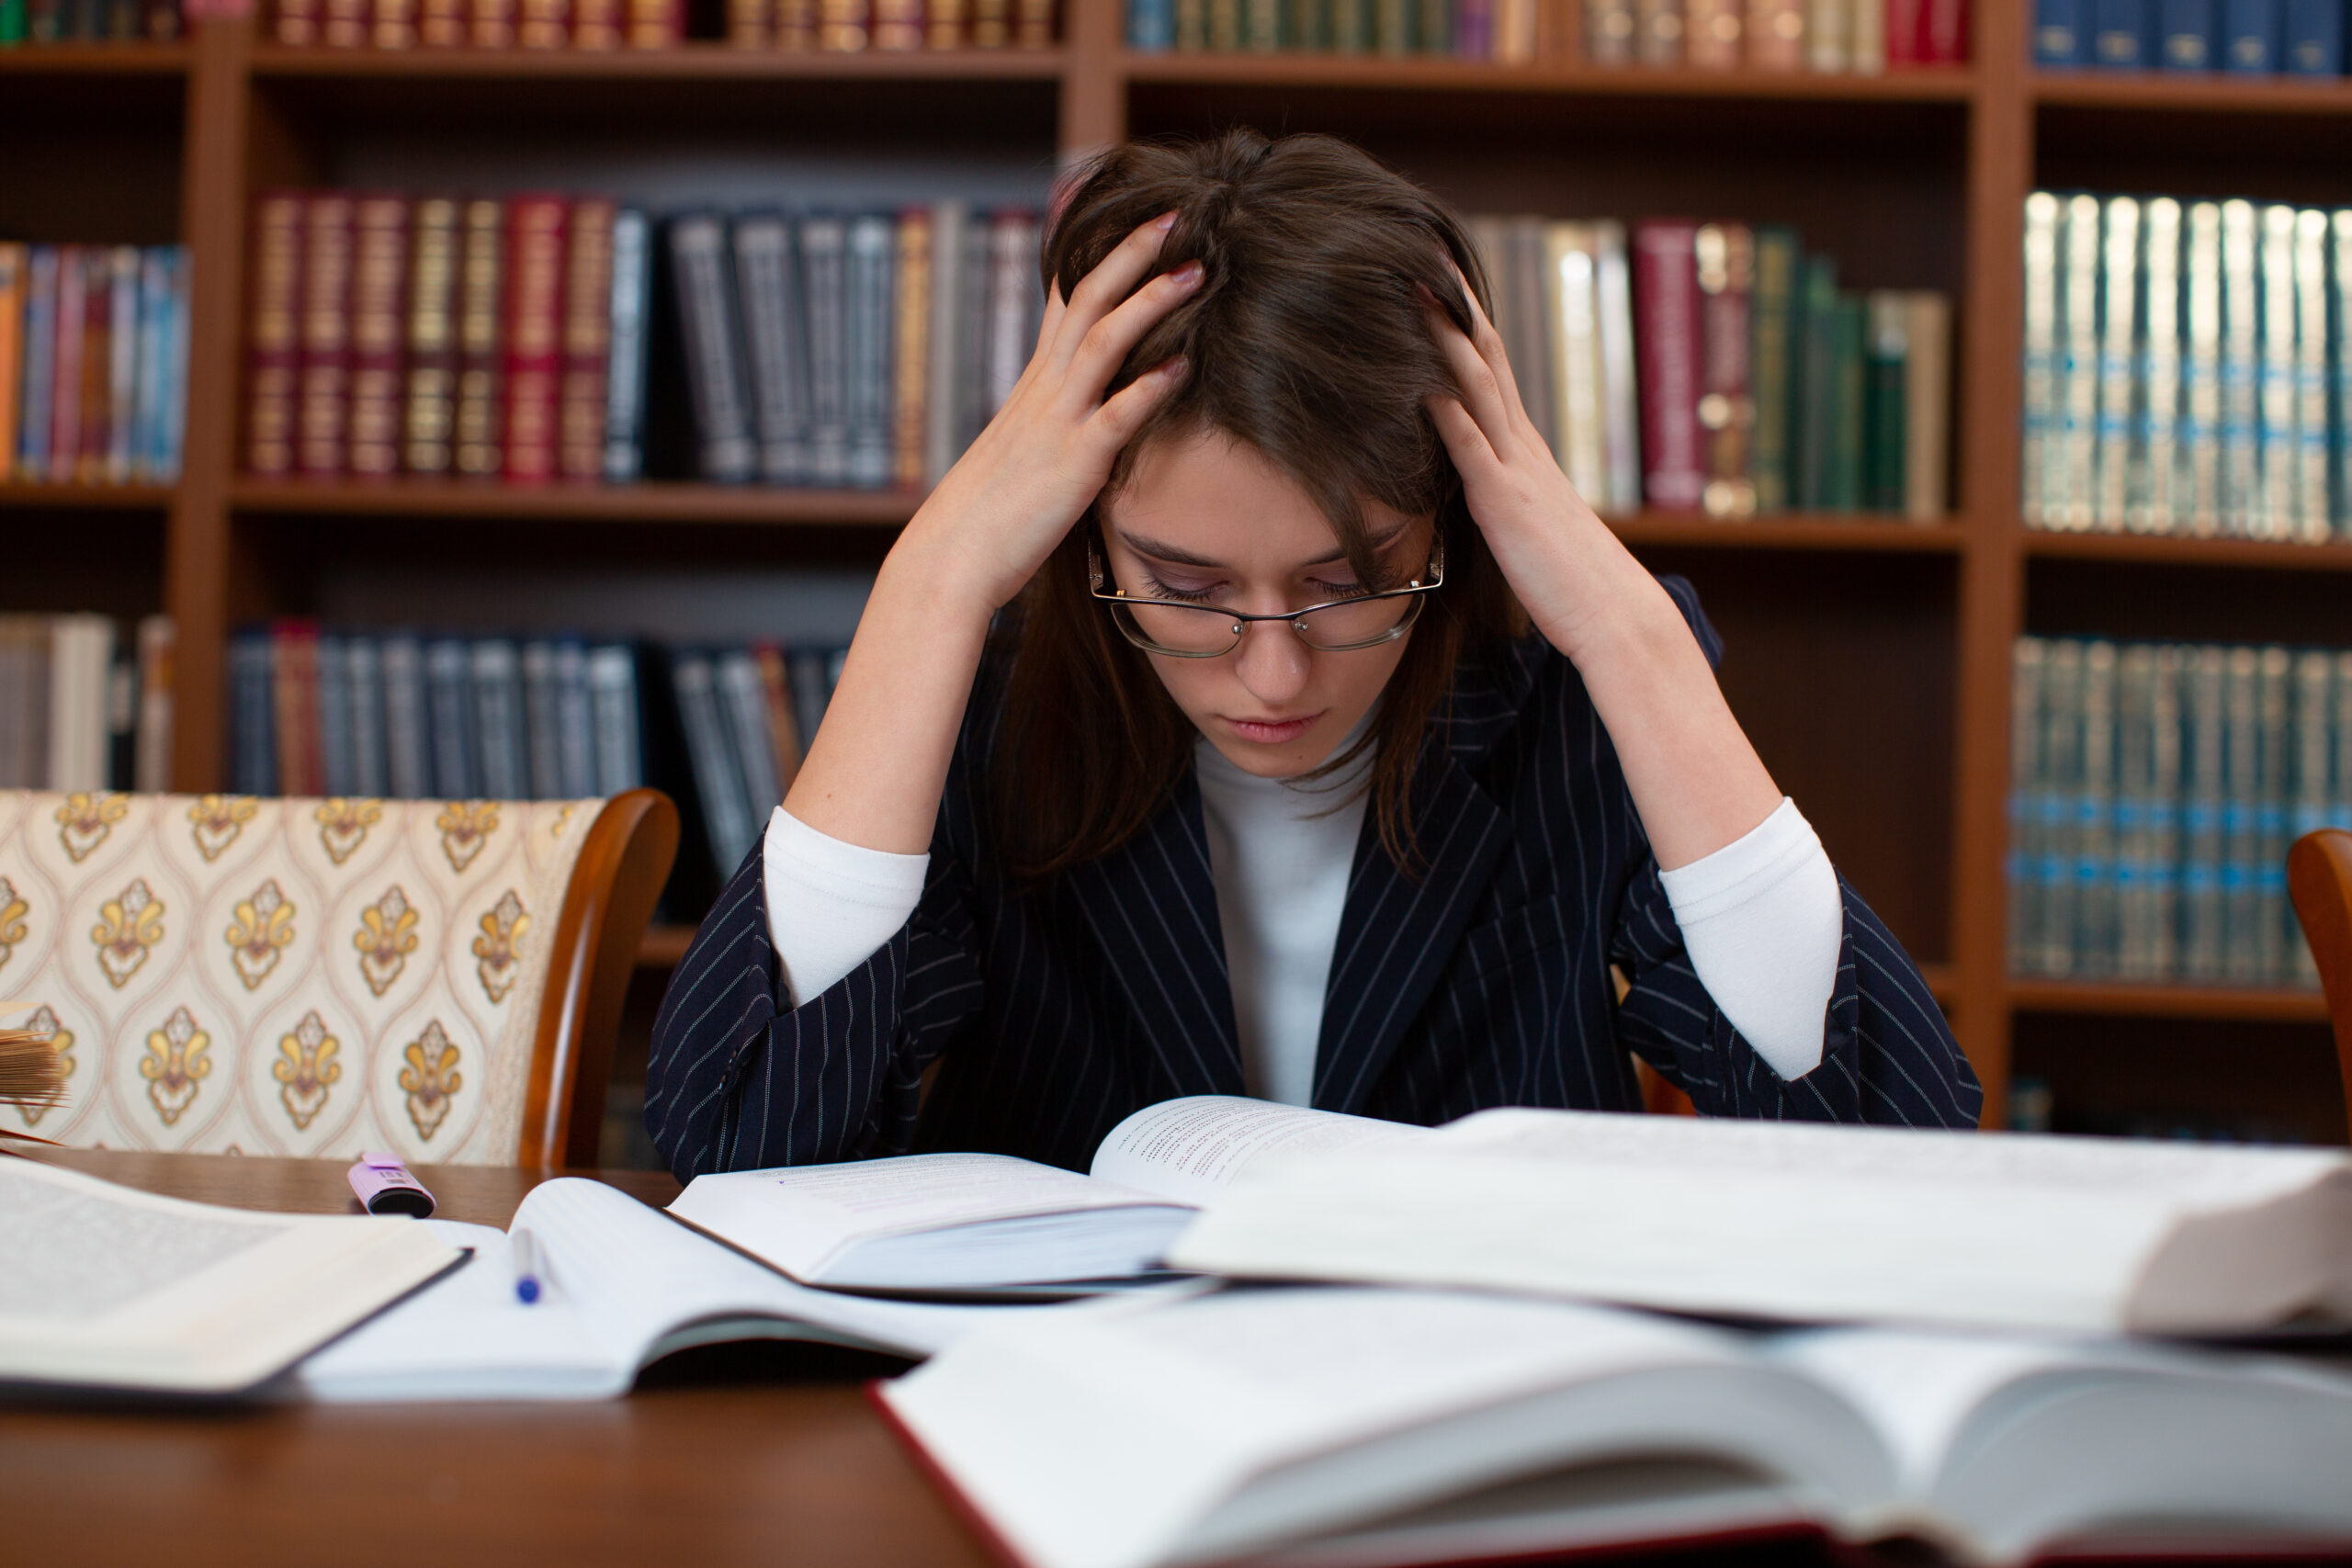 young woman holds her head in disappointment at desk with open books